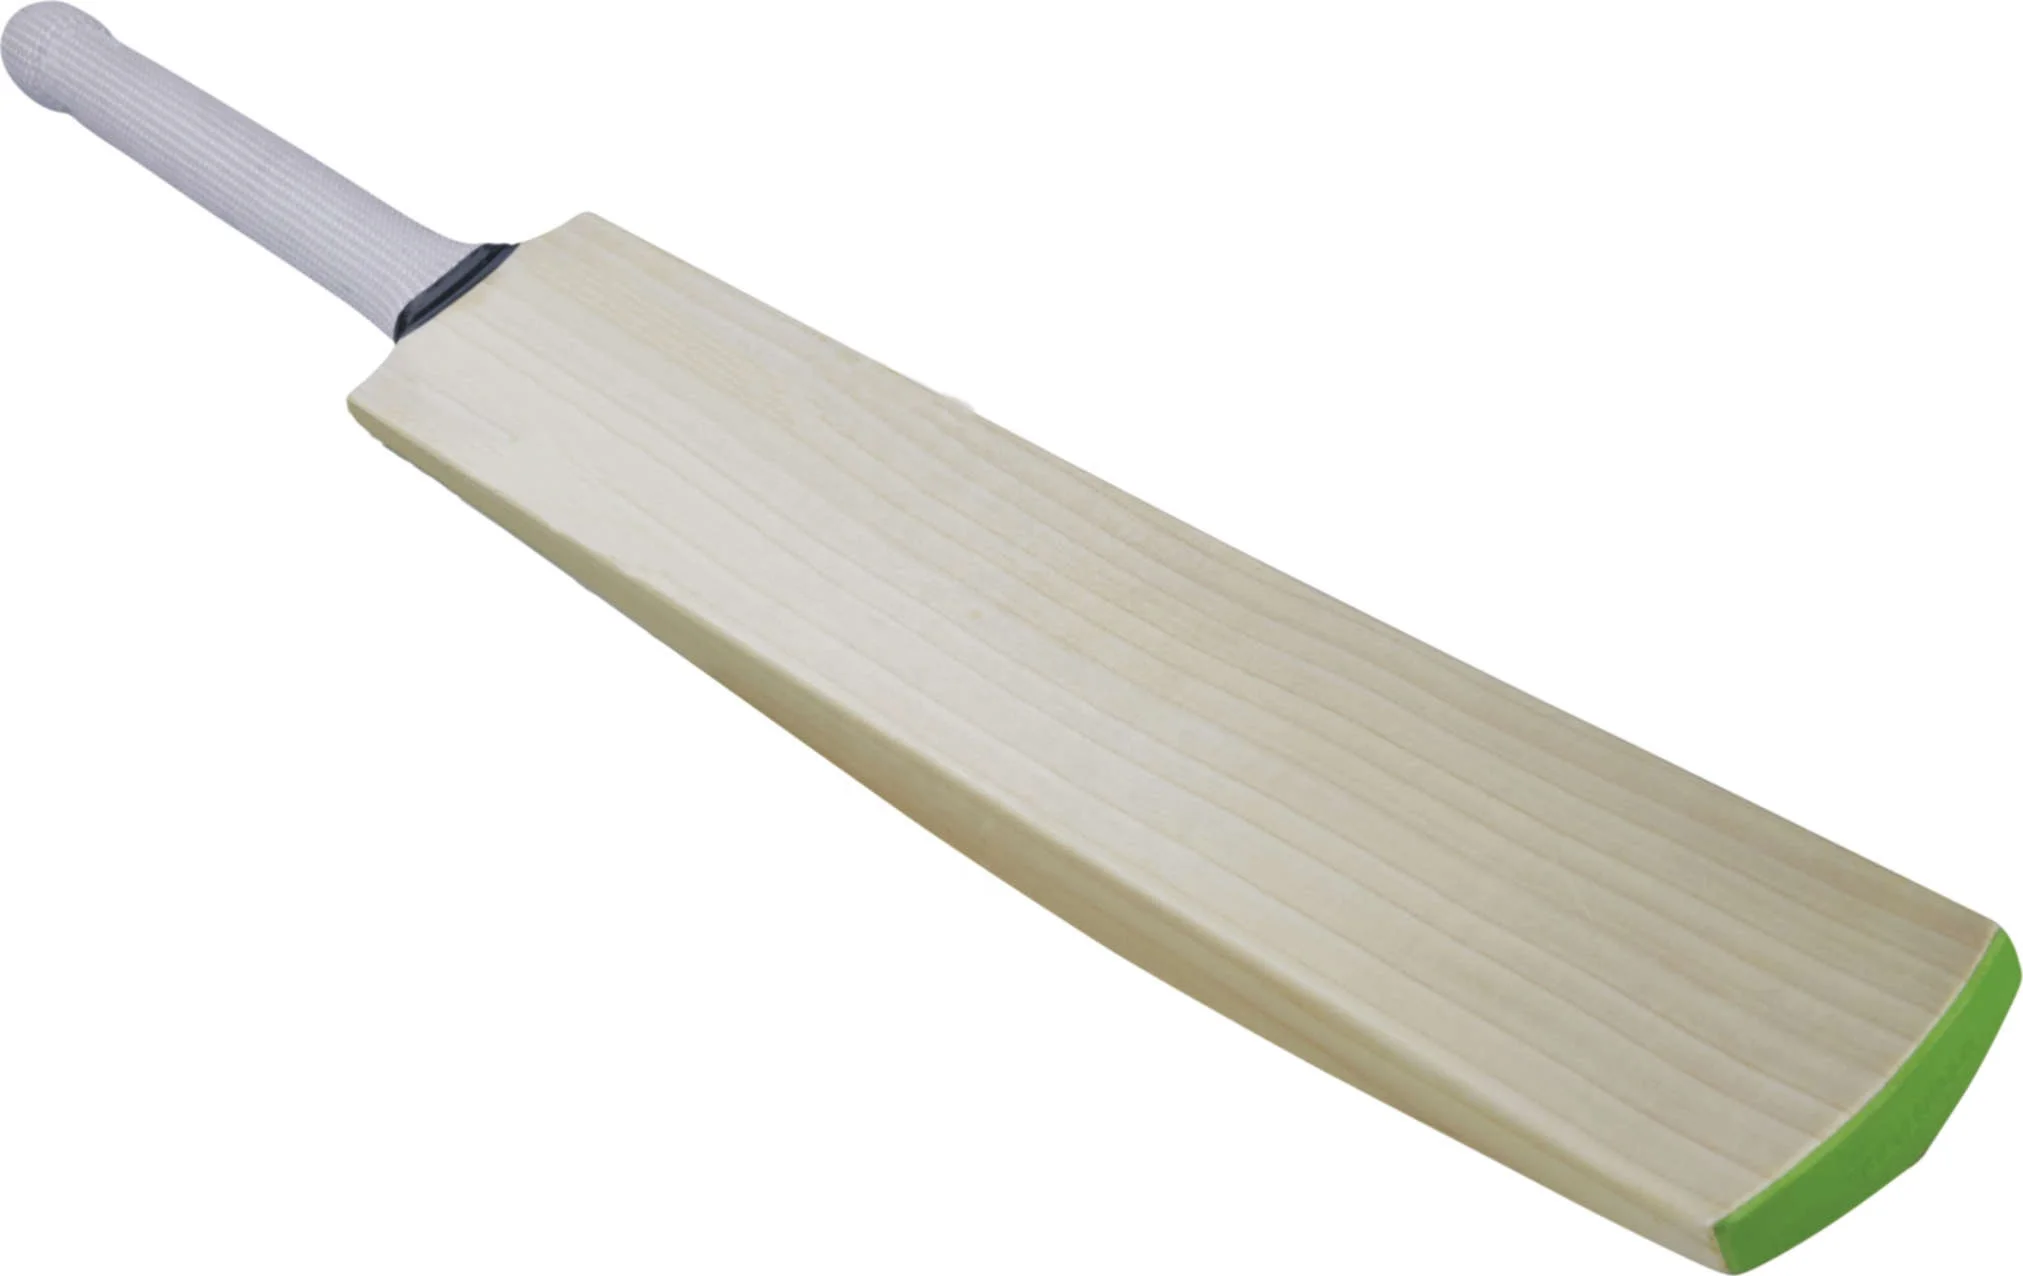 PLAYER EDITION OEM OUTDOOR A+ GRADE ENGLISH WILLOW WOOD CRICKET BAT HIGH QUALITY CLEFT PLAYER BAT MATCH PLAYER CRICKET WOOD BAT